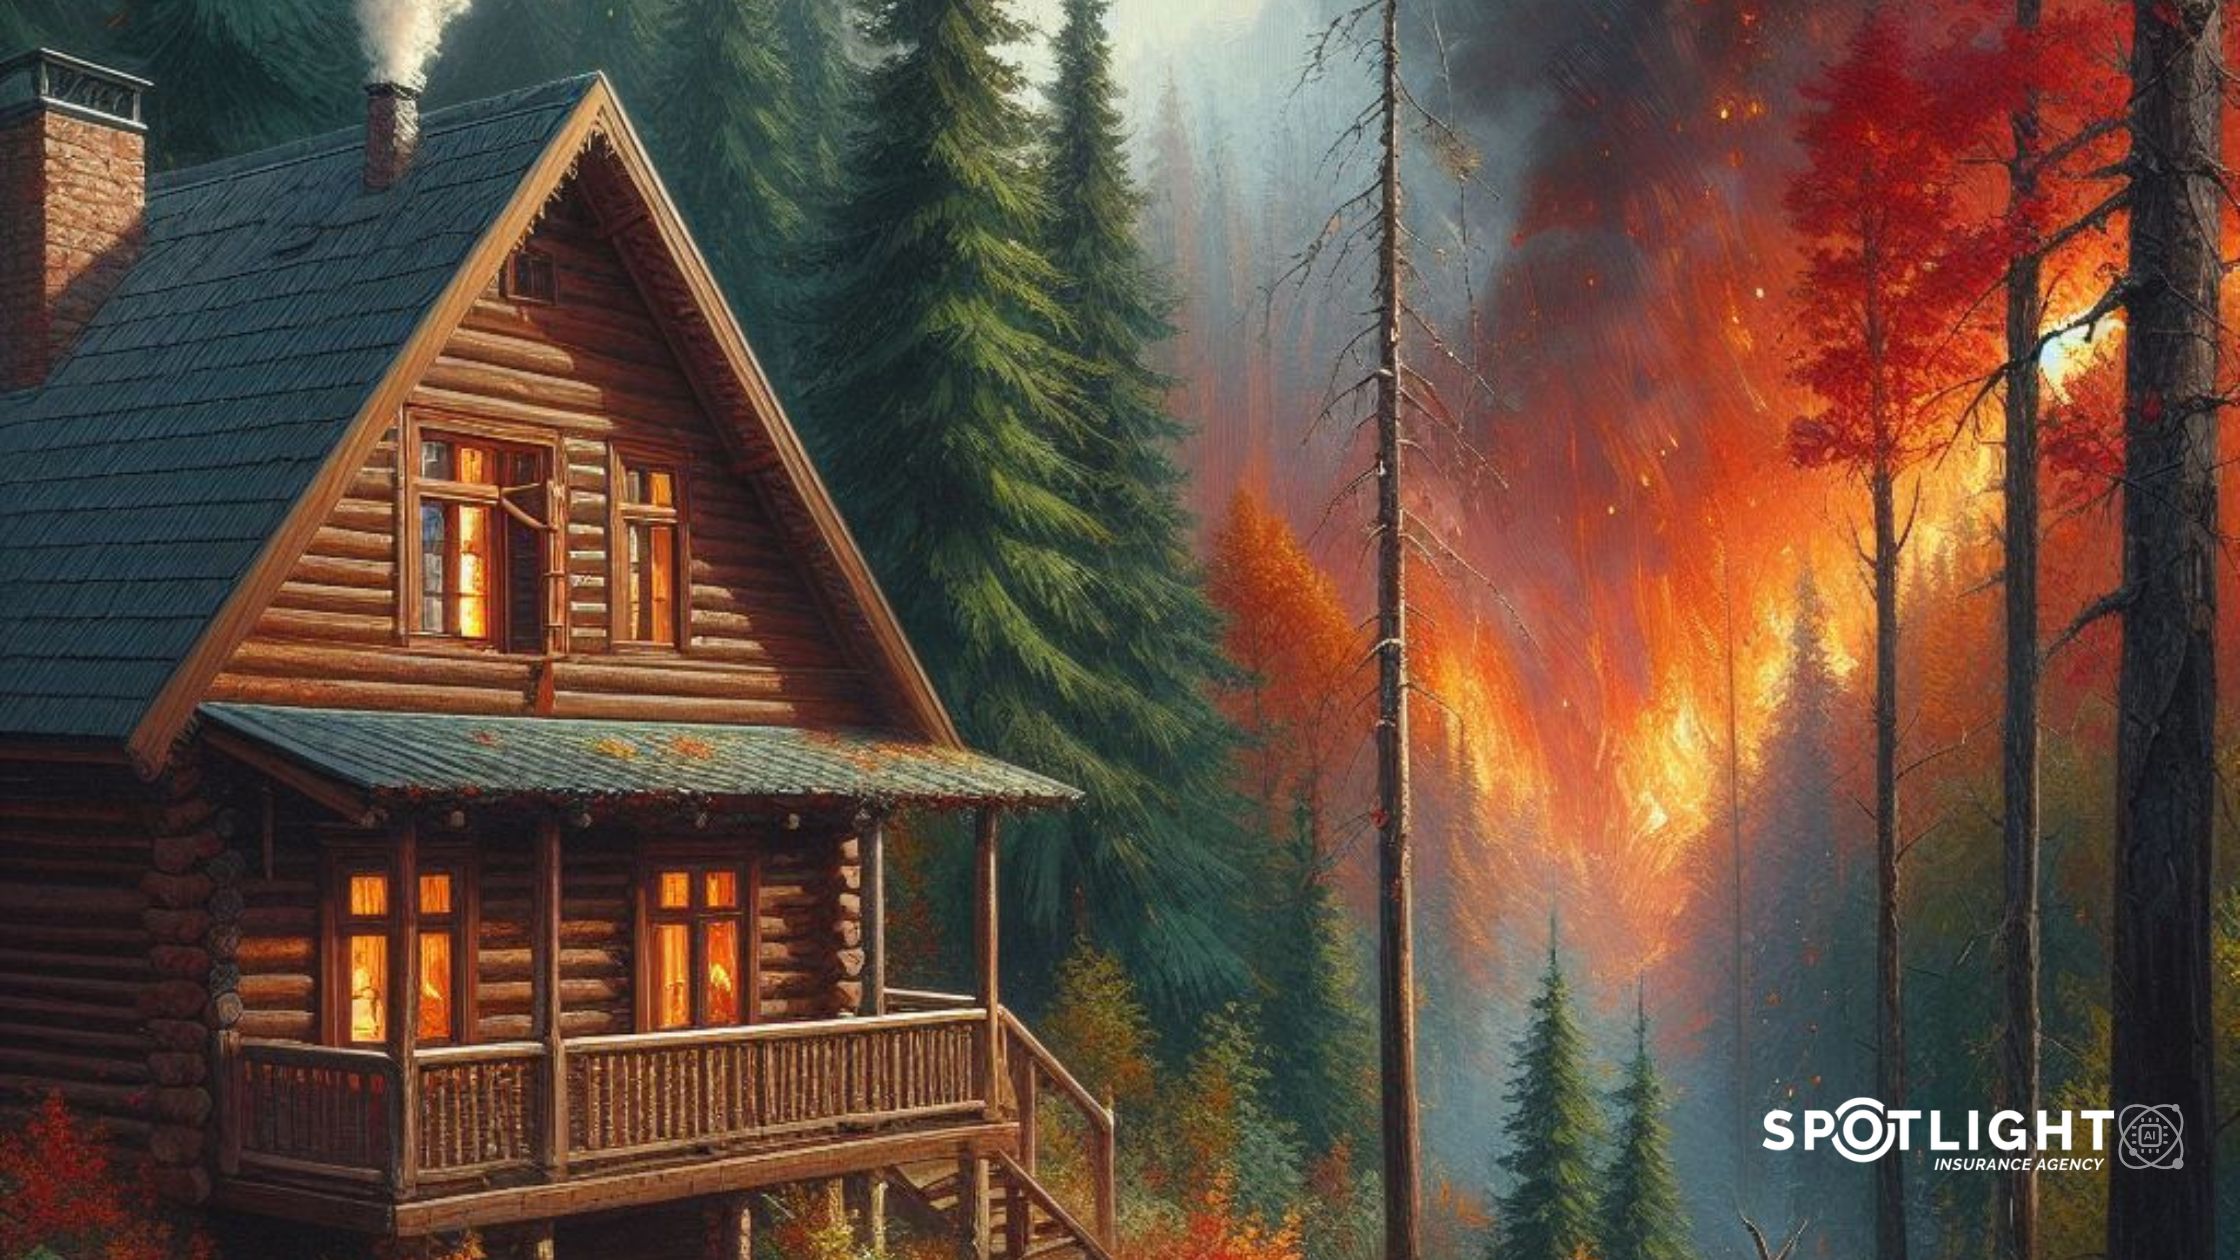 Does Homeowners Insurance Cover Wildfires? That's The Burning Issue